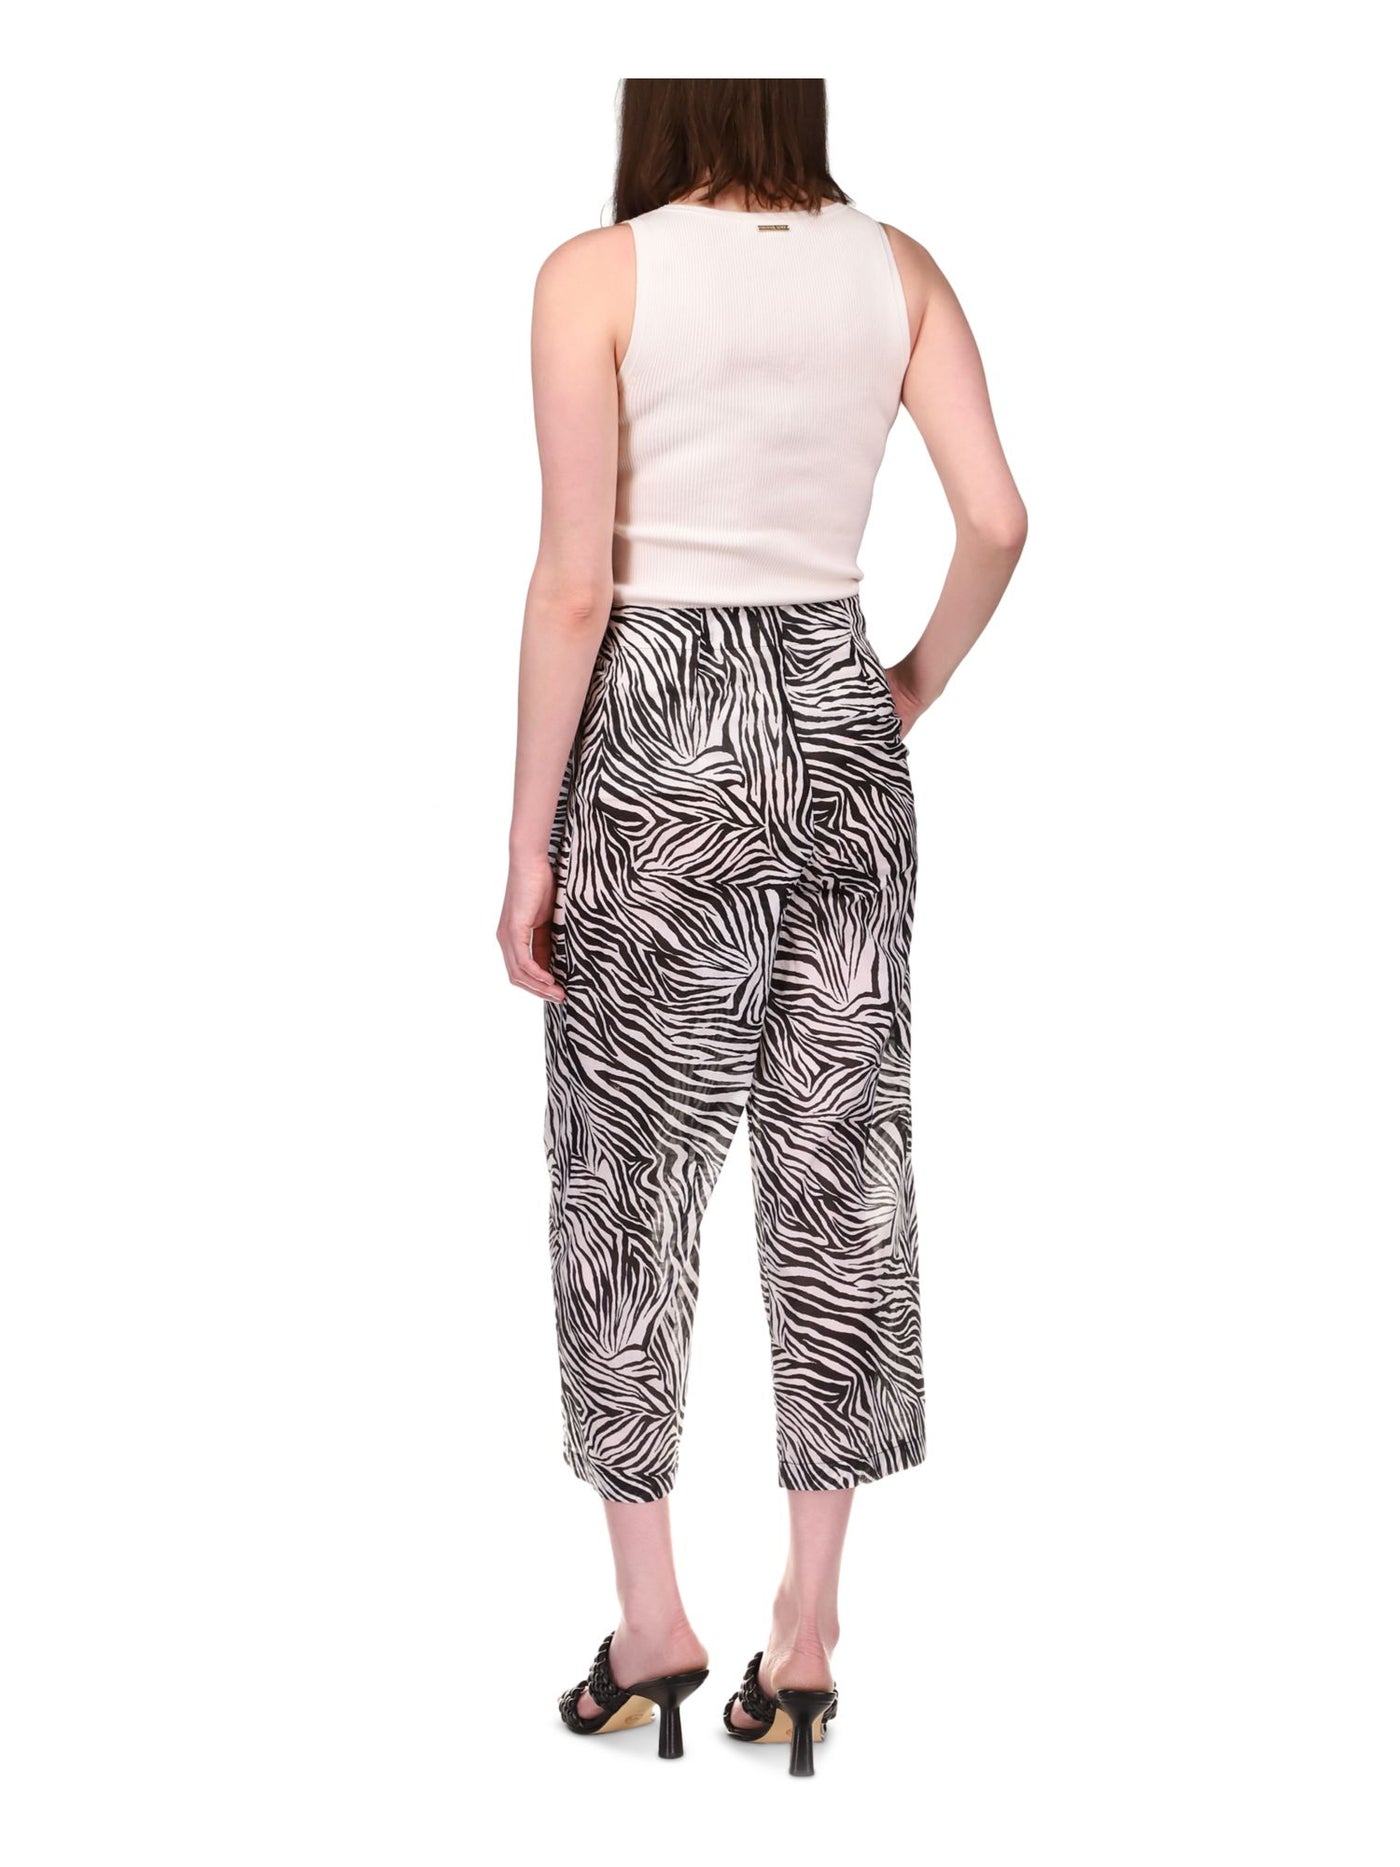 MICHAEL MICHAEL KORS Womens White Pocketed Zippered Animal Print Cropped Pants 6